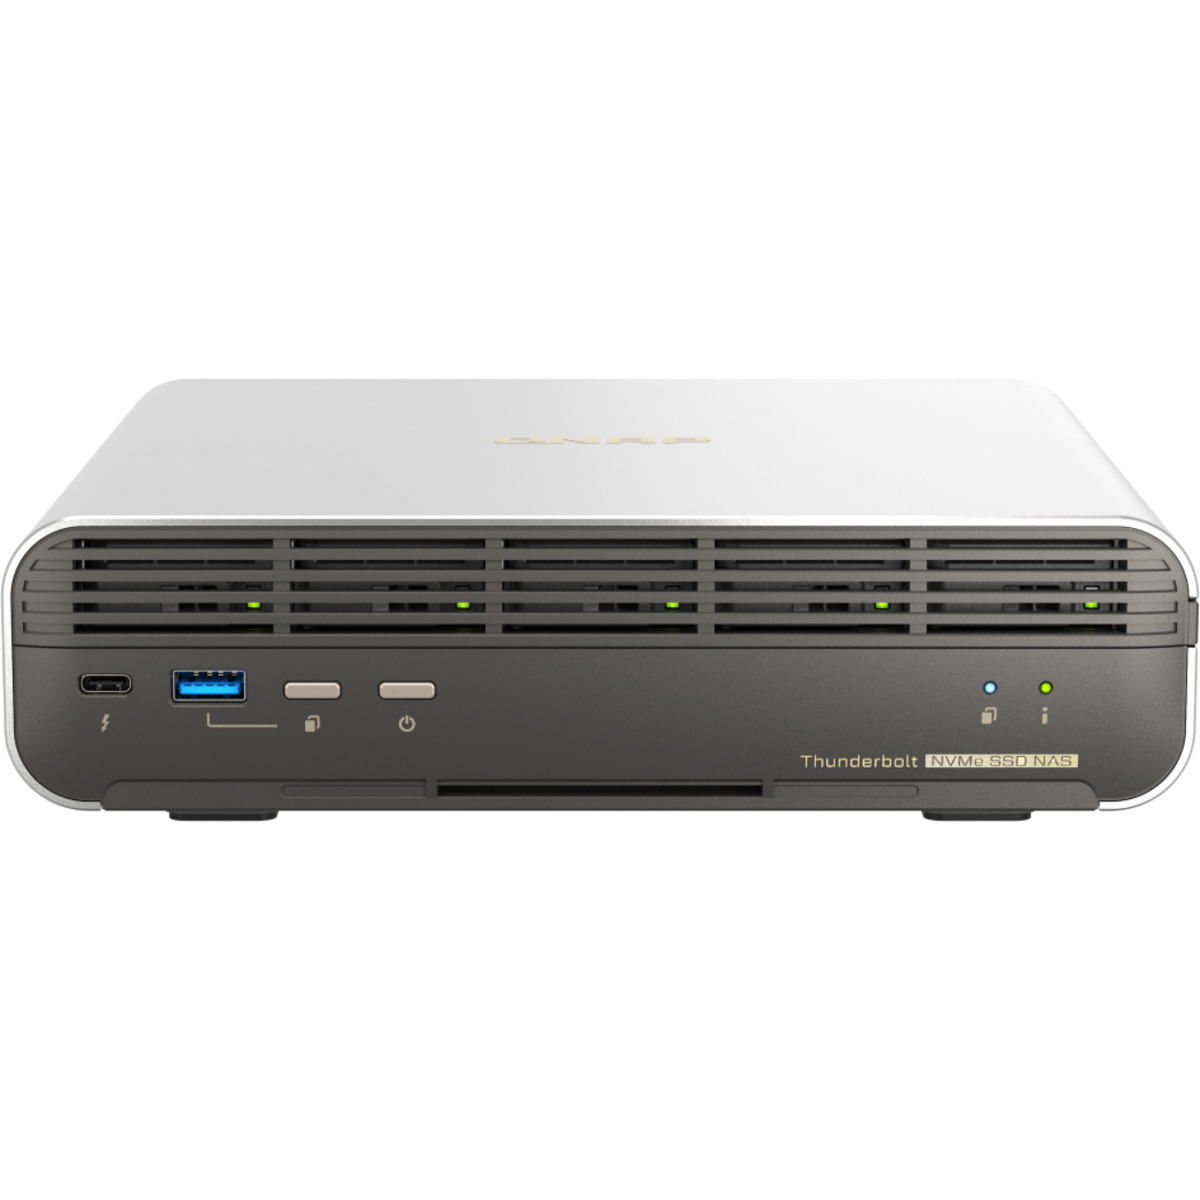 QNAP TBS-h574TX Core i5 Thunderbolt 4 1.2tb 5-Bay Desktop Multimedia / Power User / Business DAS-NAS - Combo Direct + Network Storage Device 5x250gb Sandisk Plus Series SDSSDA3N-250G  2400/1500MB/s M.2 2280 NVMe SSD CONSUMER Class Drives Installed - Burn-In Tested TBS-h574TX Core i5 Thunderbolt 4